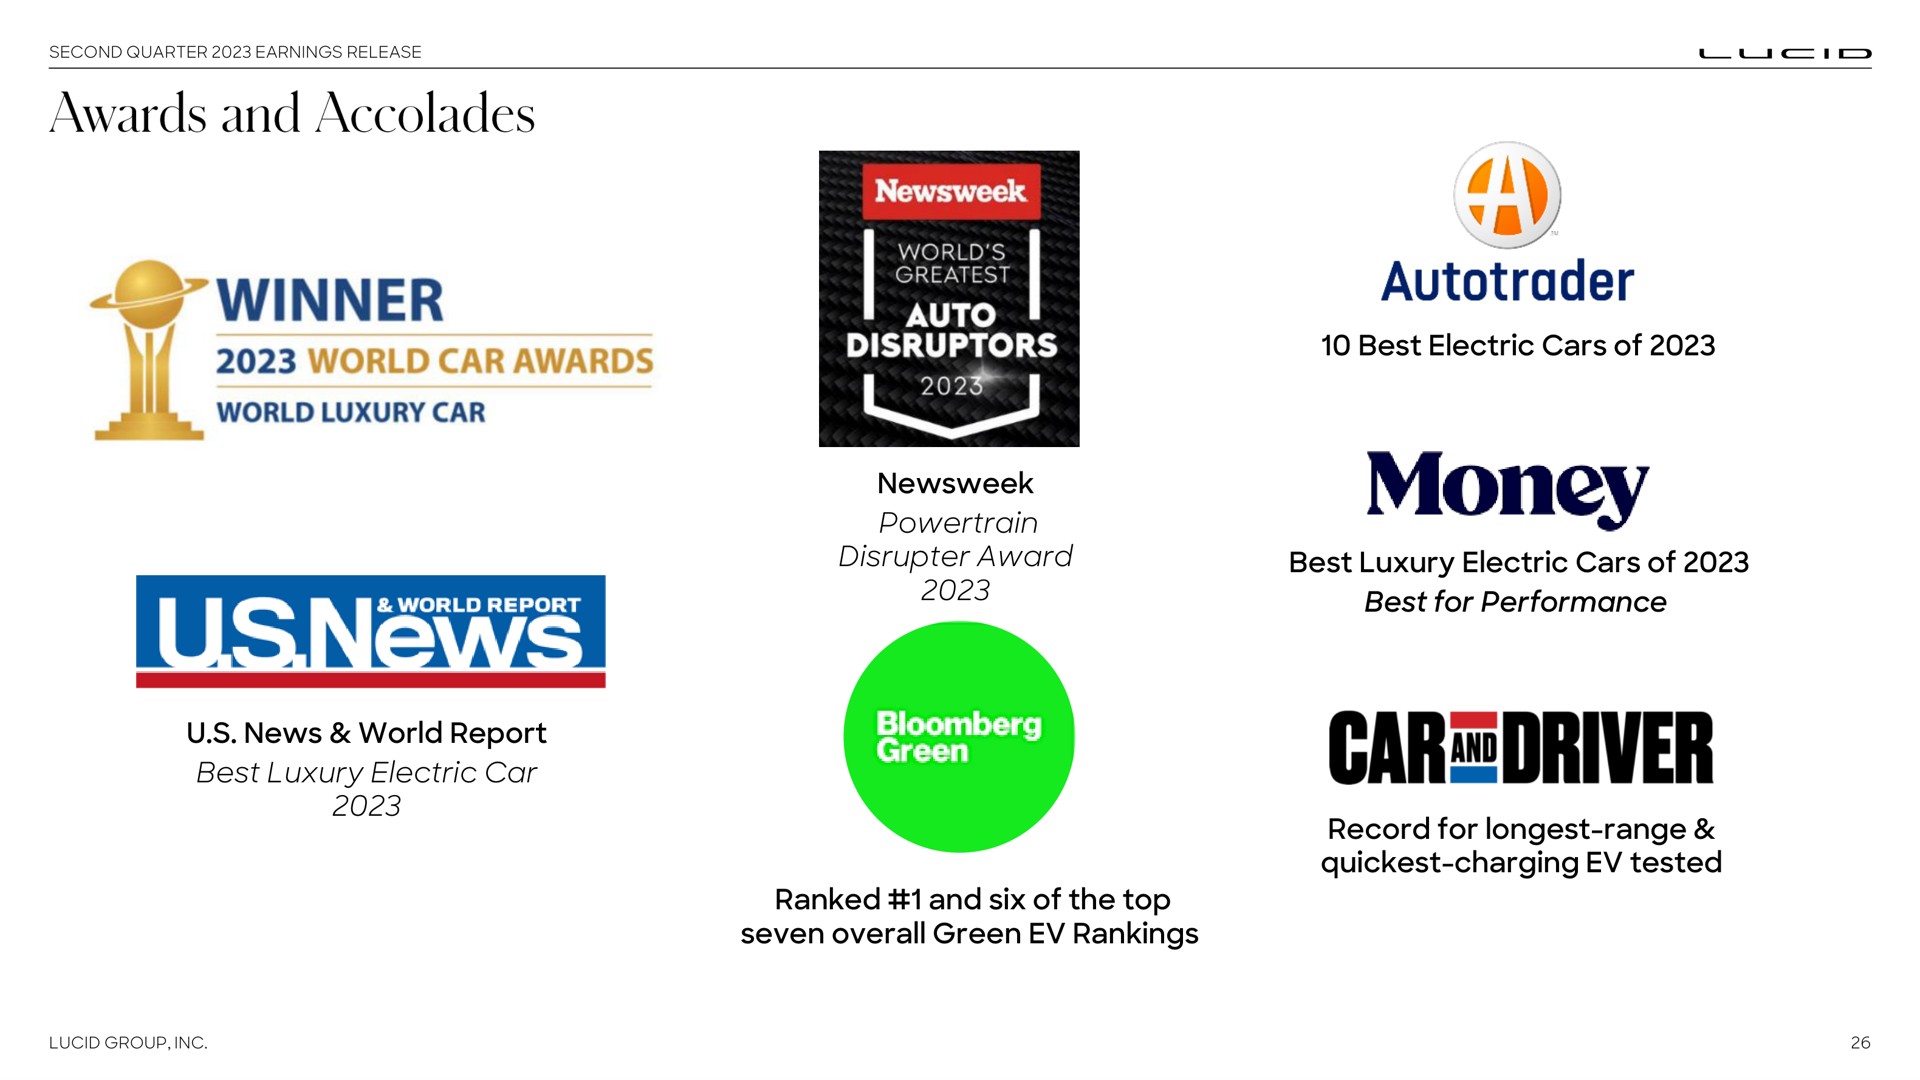 best electric cars of disrupter award best luxury electric cars of best for performance news world report best luxury electric car ranked and six of the top seven overall green rankings record for range charging tested awards accolades winner awards elk a money auto | Lucid Motors